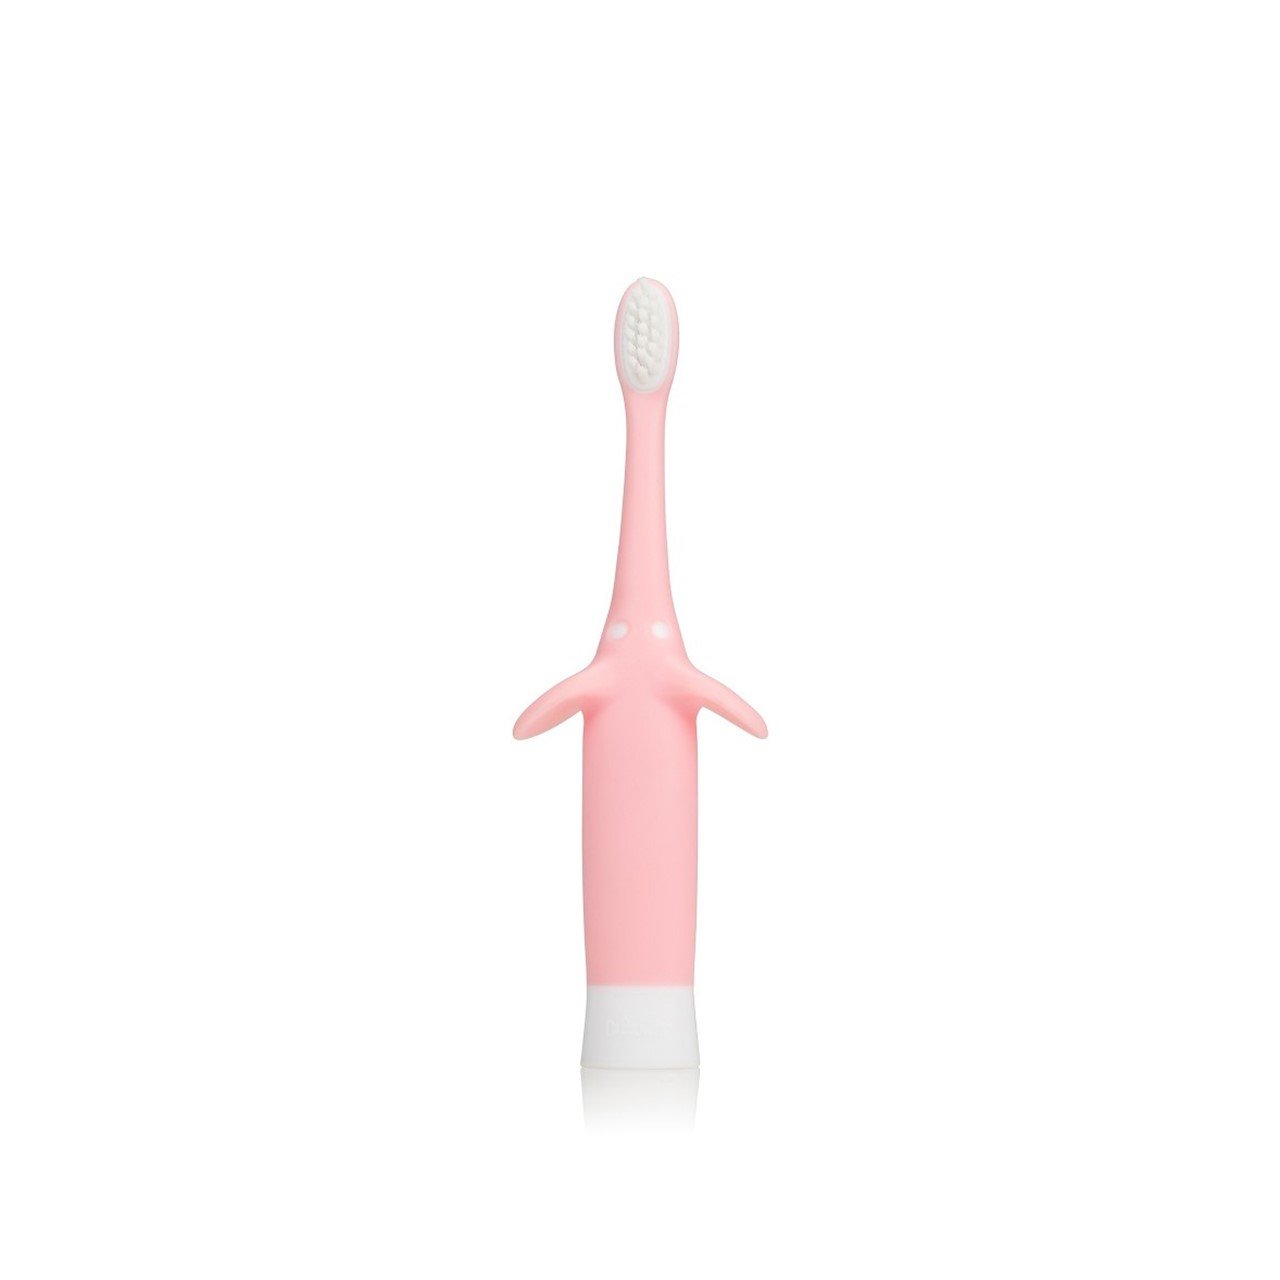 Dr. Brown's Infant-to-Toddler Toothbrush 0-3 Years Pink Elephant x1